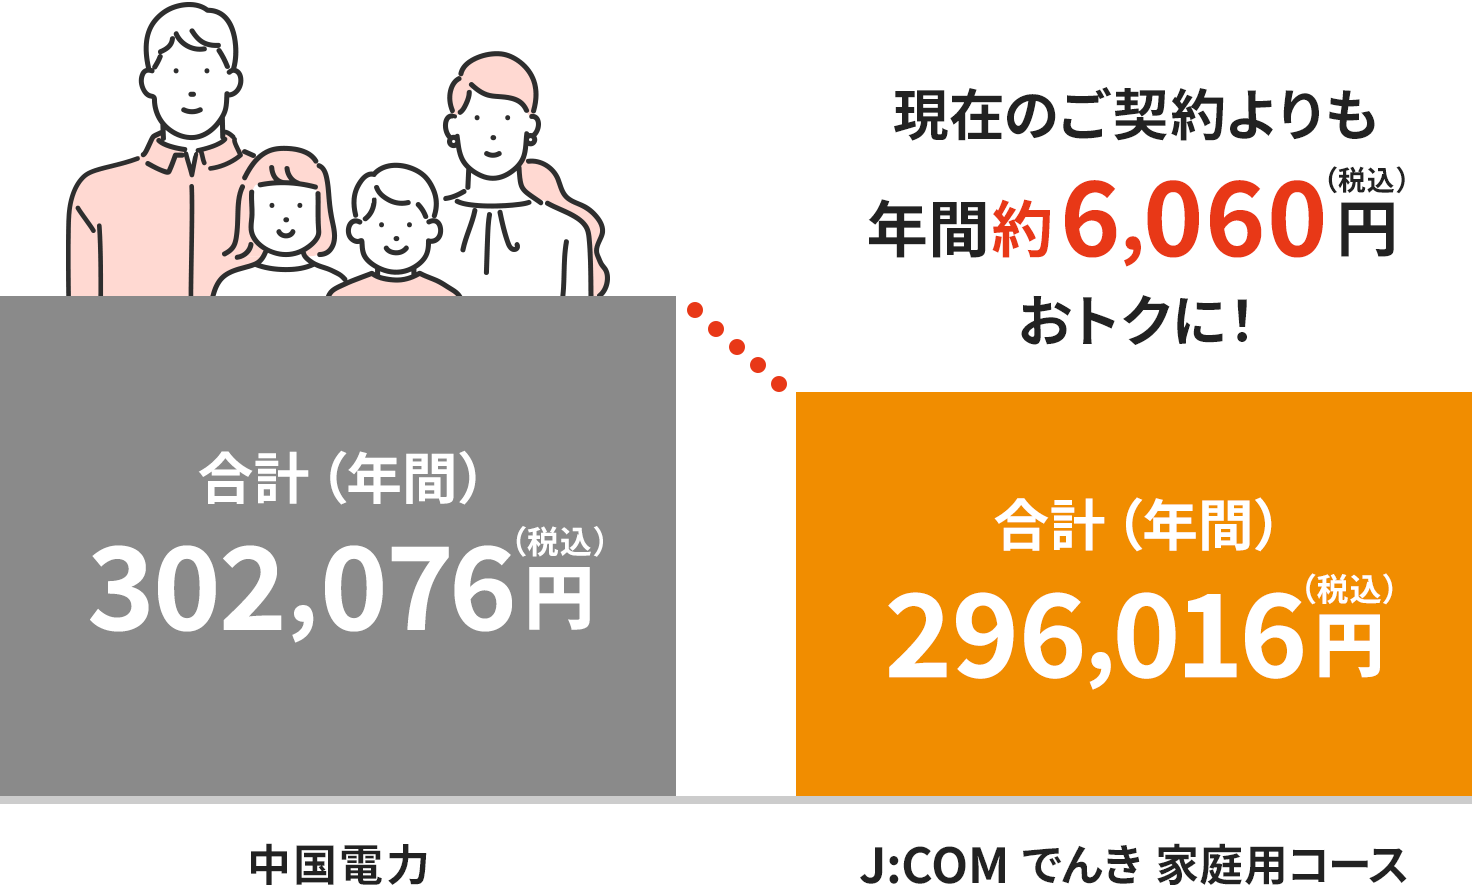 Image of charges in the Chugoku Electric Power area (for a four-person household)